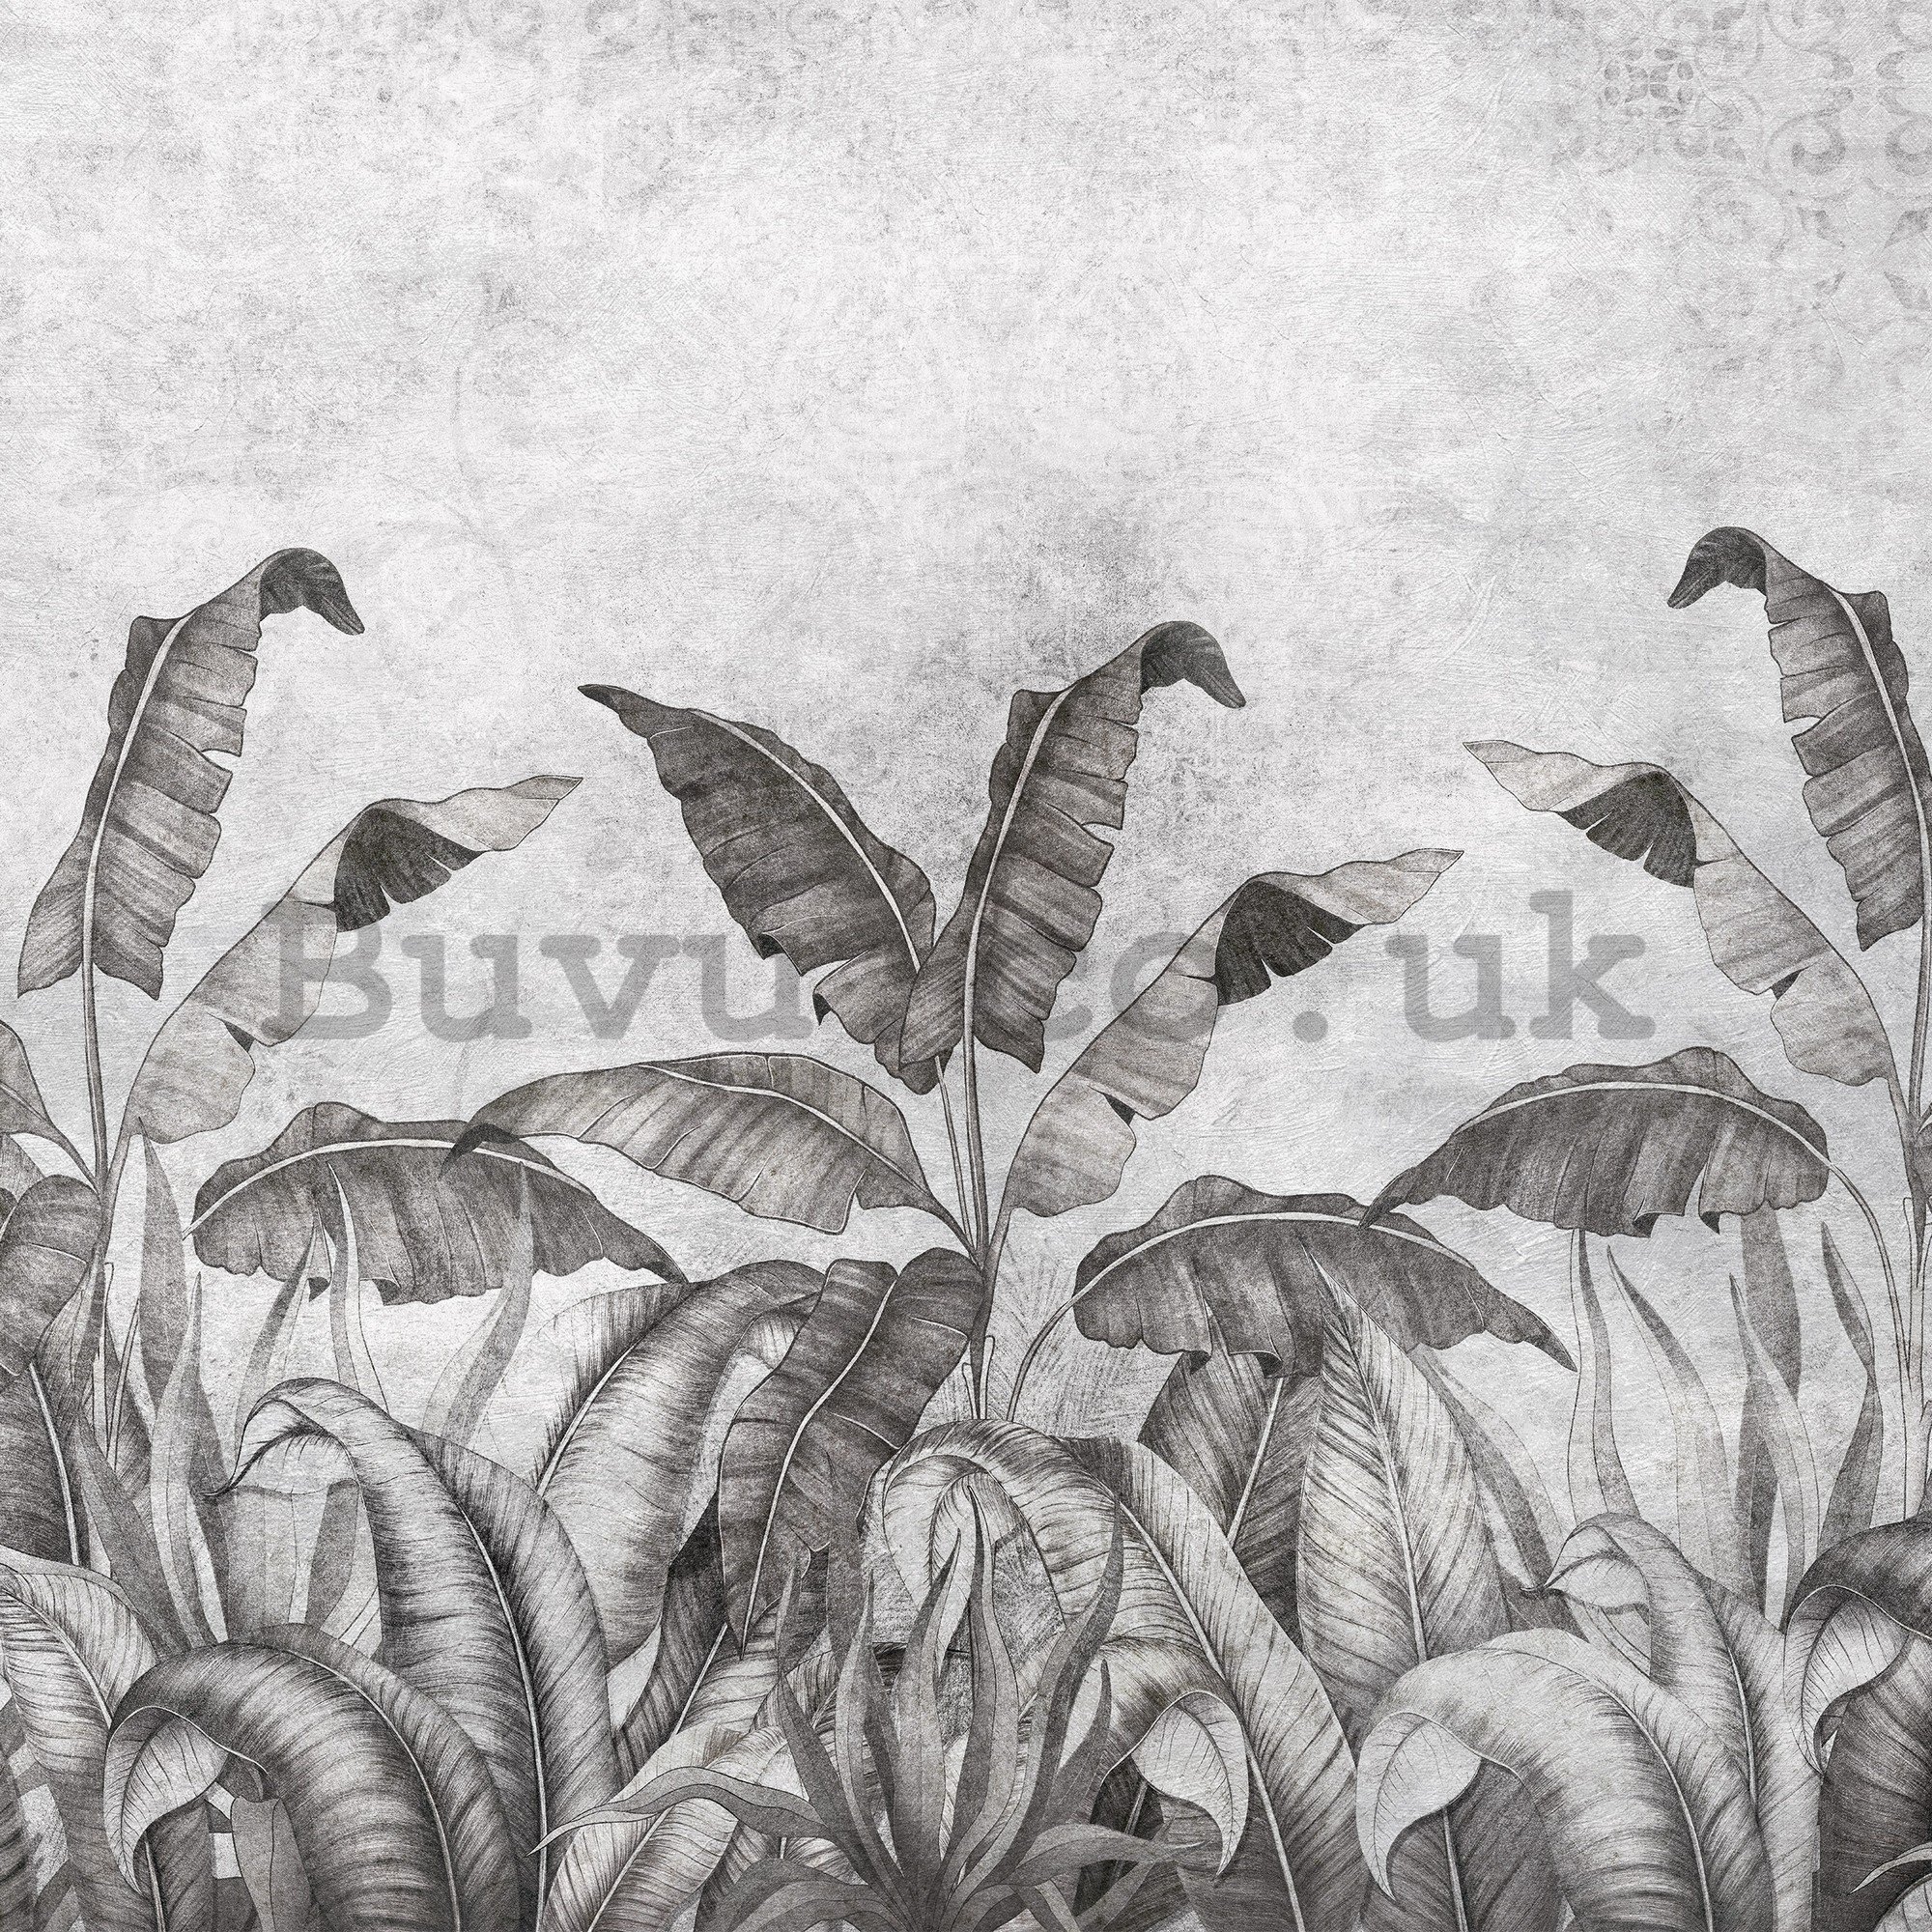 Wall mural vlies: Black and white imitation of natural leave (2) - 368x254 cm